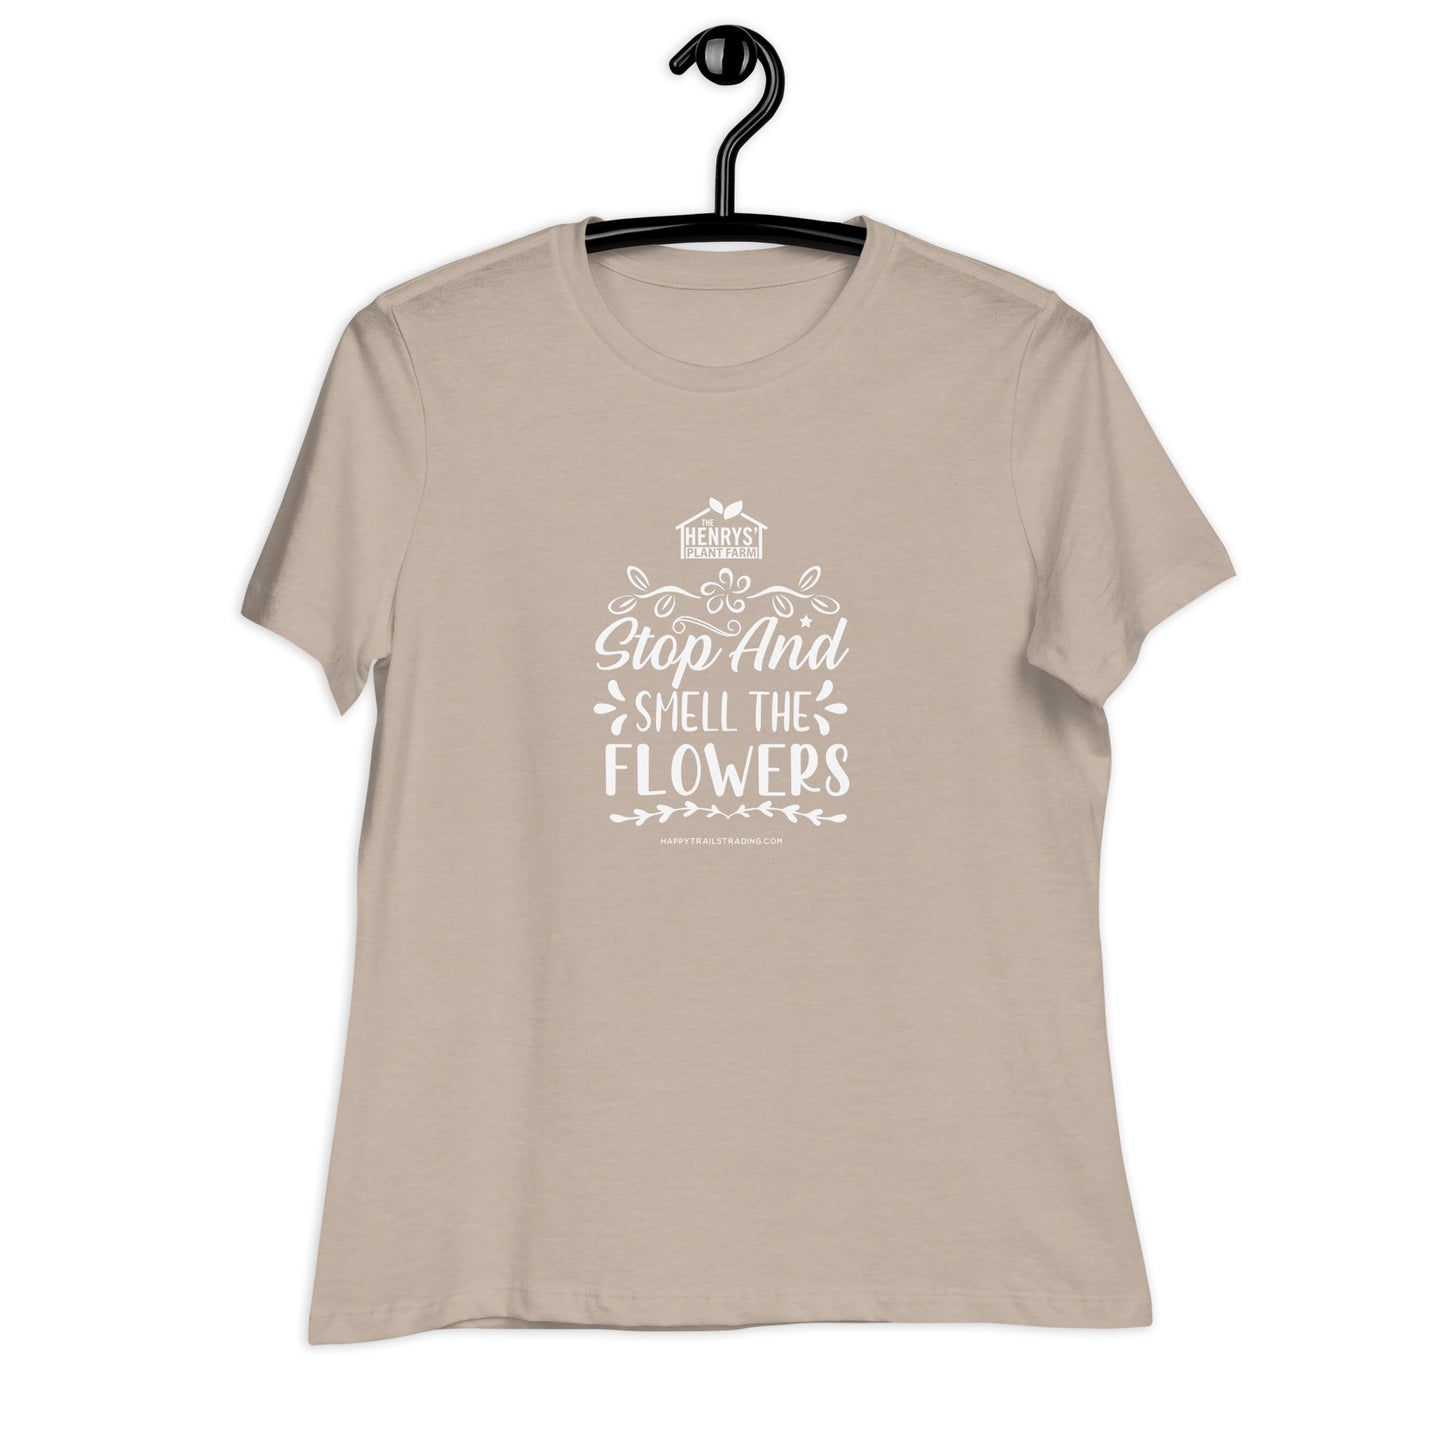 Stop And Smell The Flowers - Women's Relaxed T-Shirt